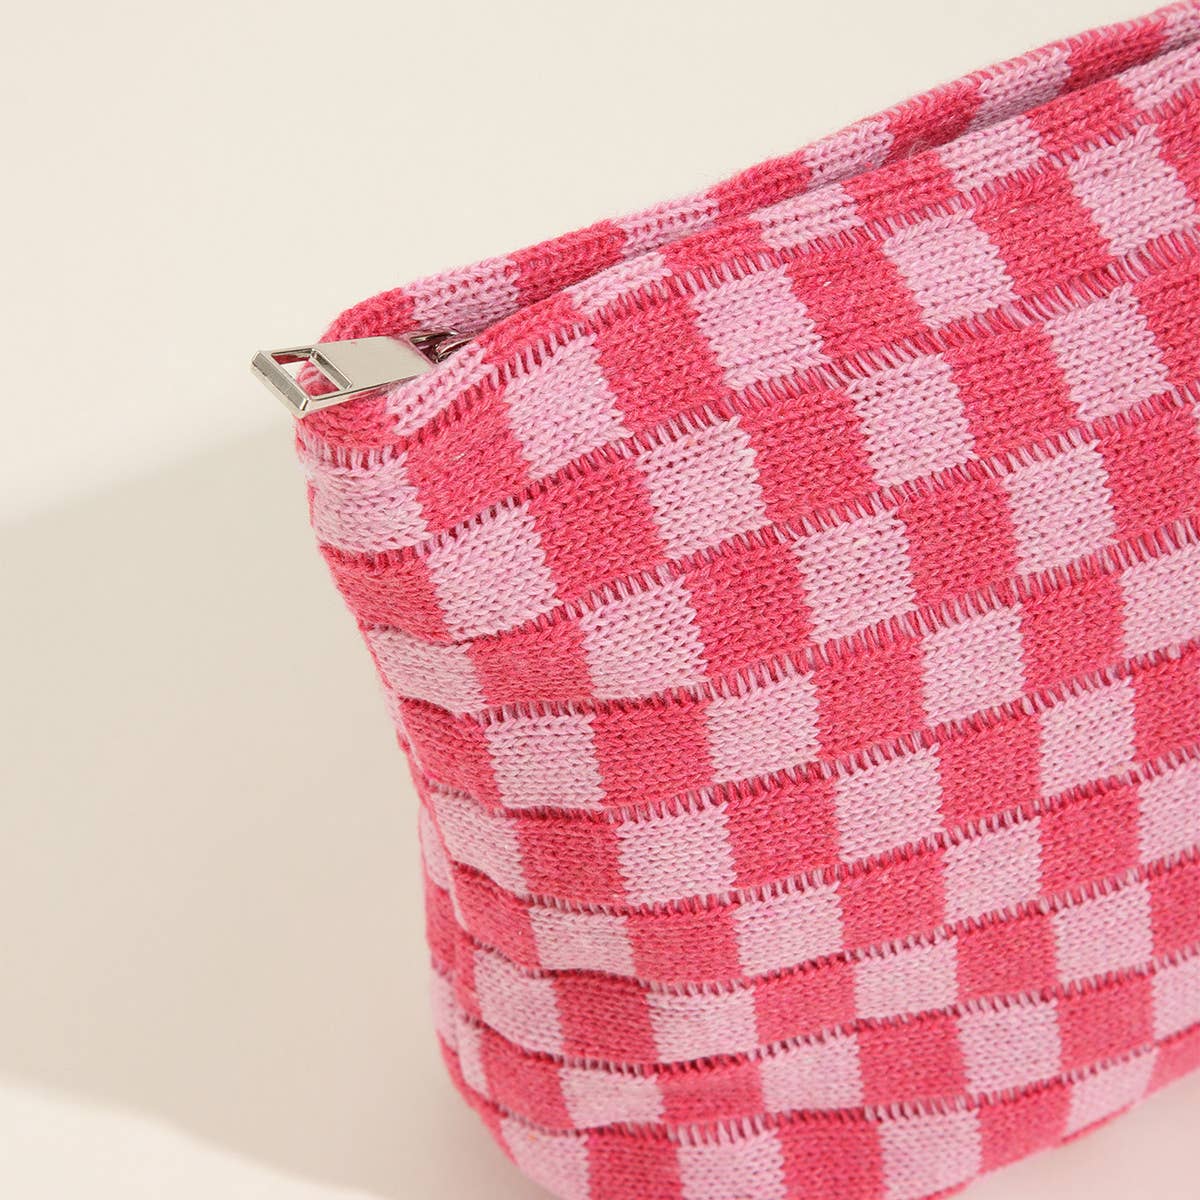 Plaid Make Up Pouch